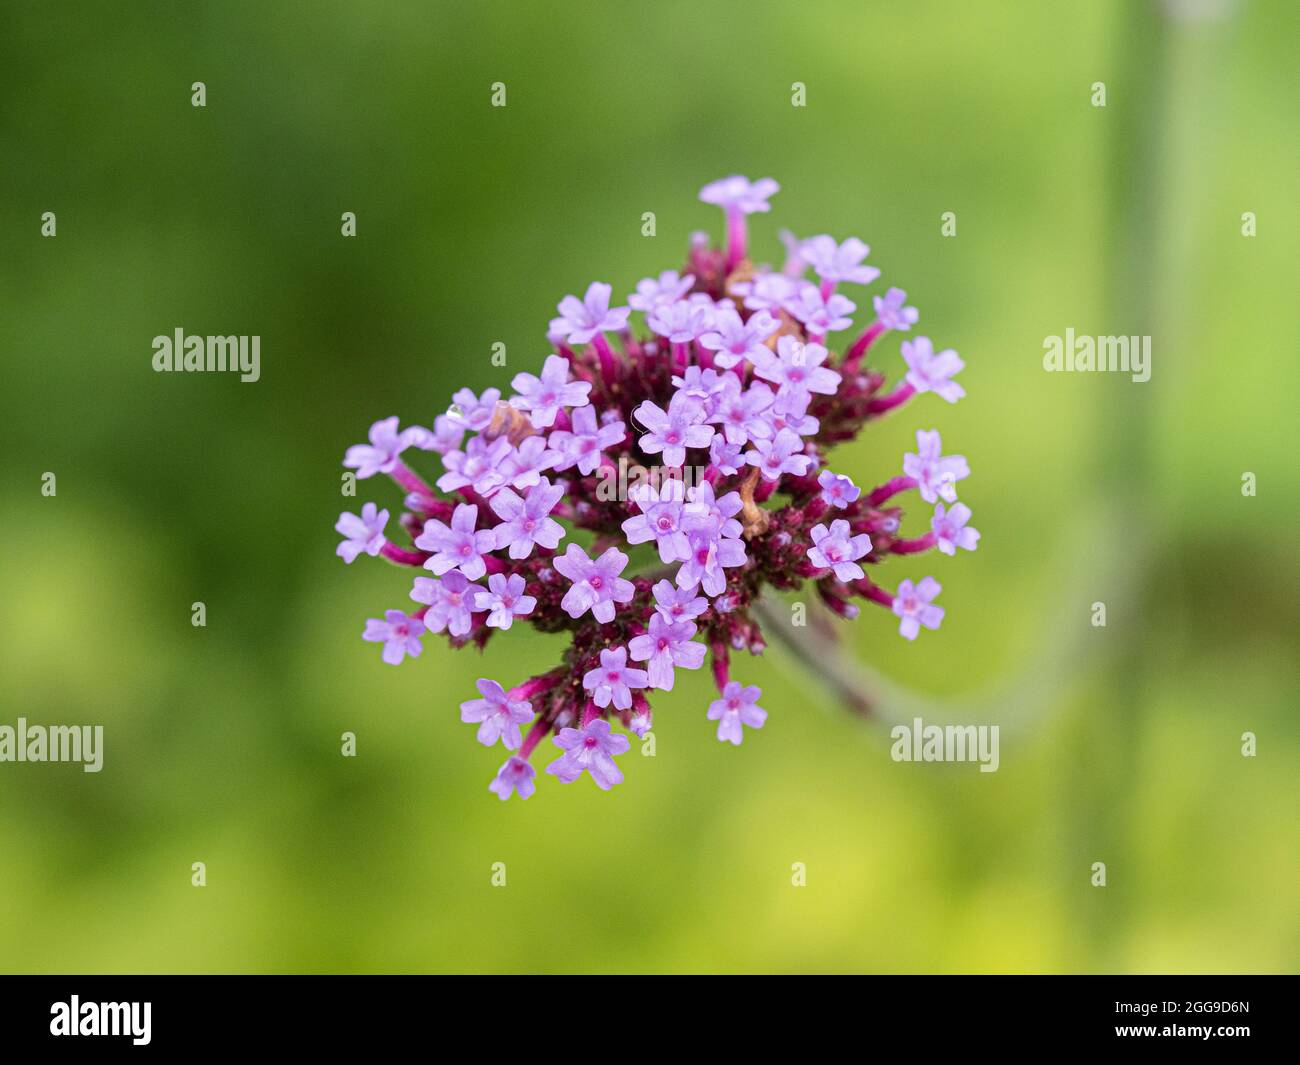 A close up of a flowerhead of Verbena bonariensis against an out of focus green foliage background Stock Photo